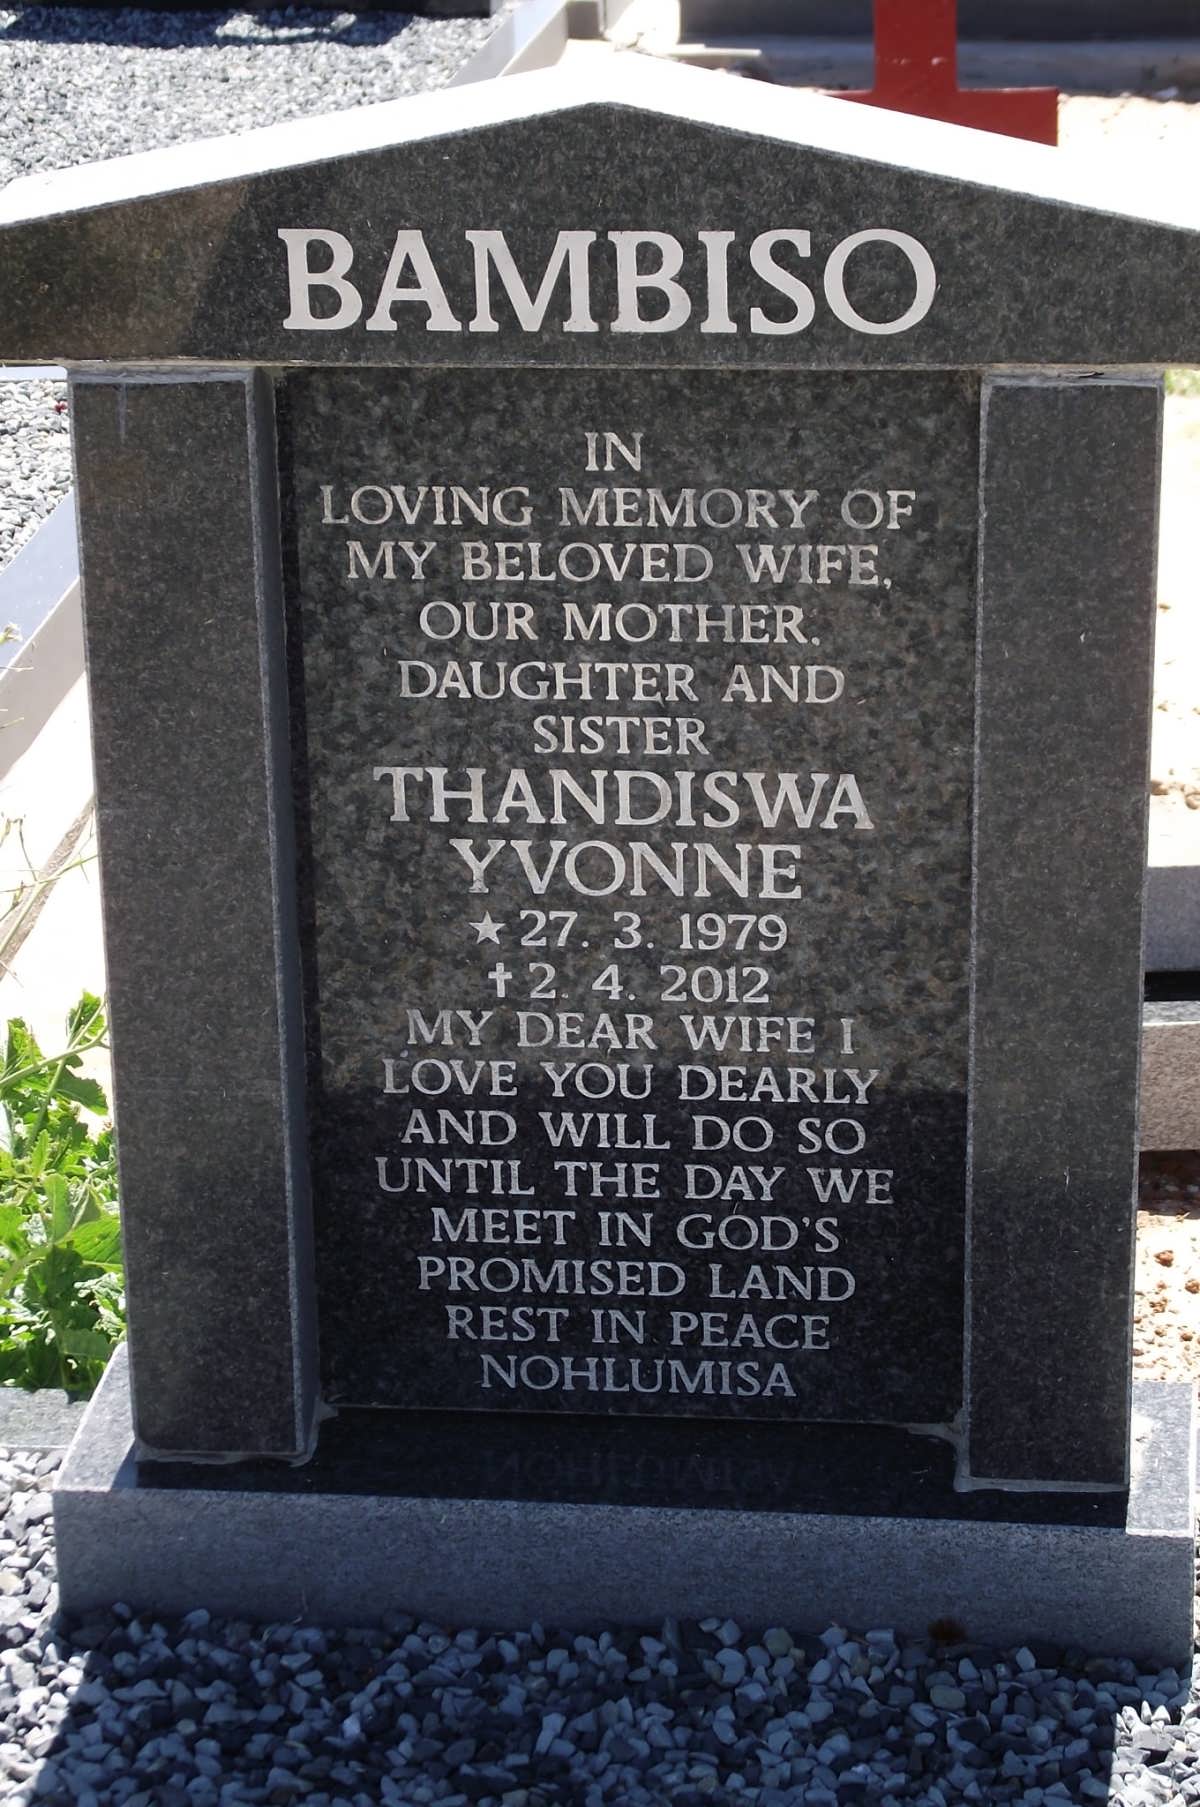 BAMBISO Thandiswa Yvonne 1979-2012